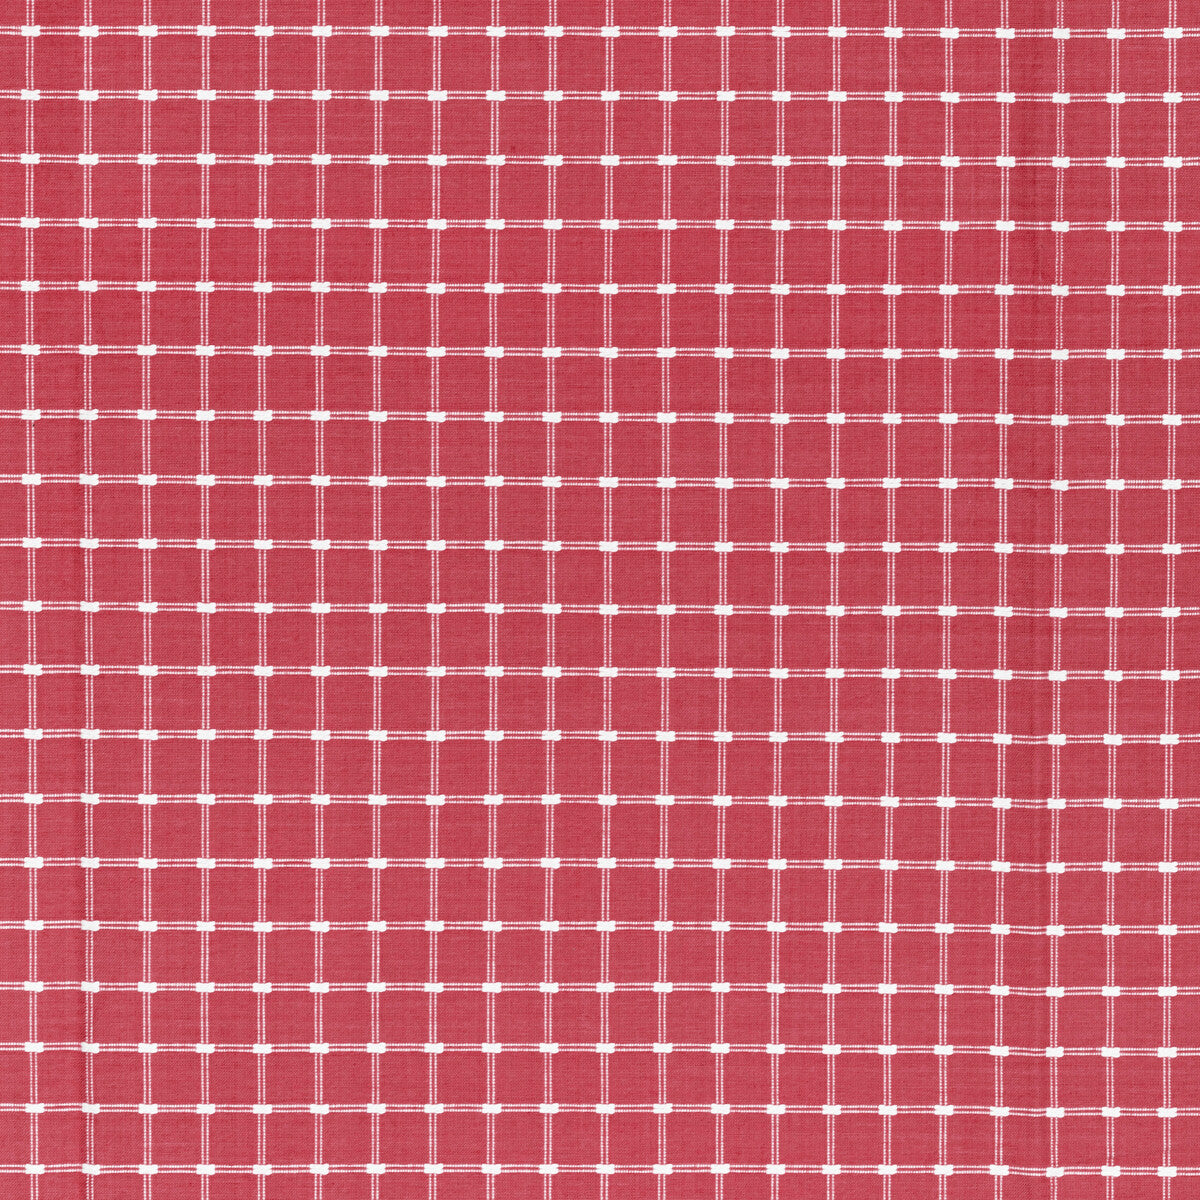 Lison Check fabric in berry color - pattern 8022116.77.0 - by Brunschwig &amp; Fils in the Normant Checks And Stripes II collection